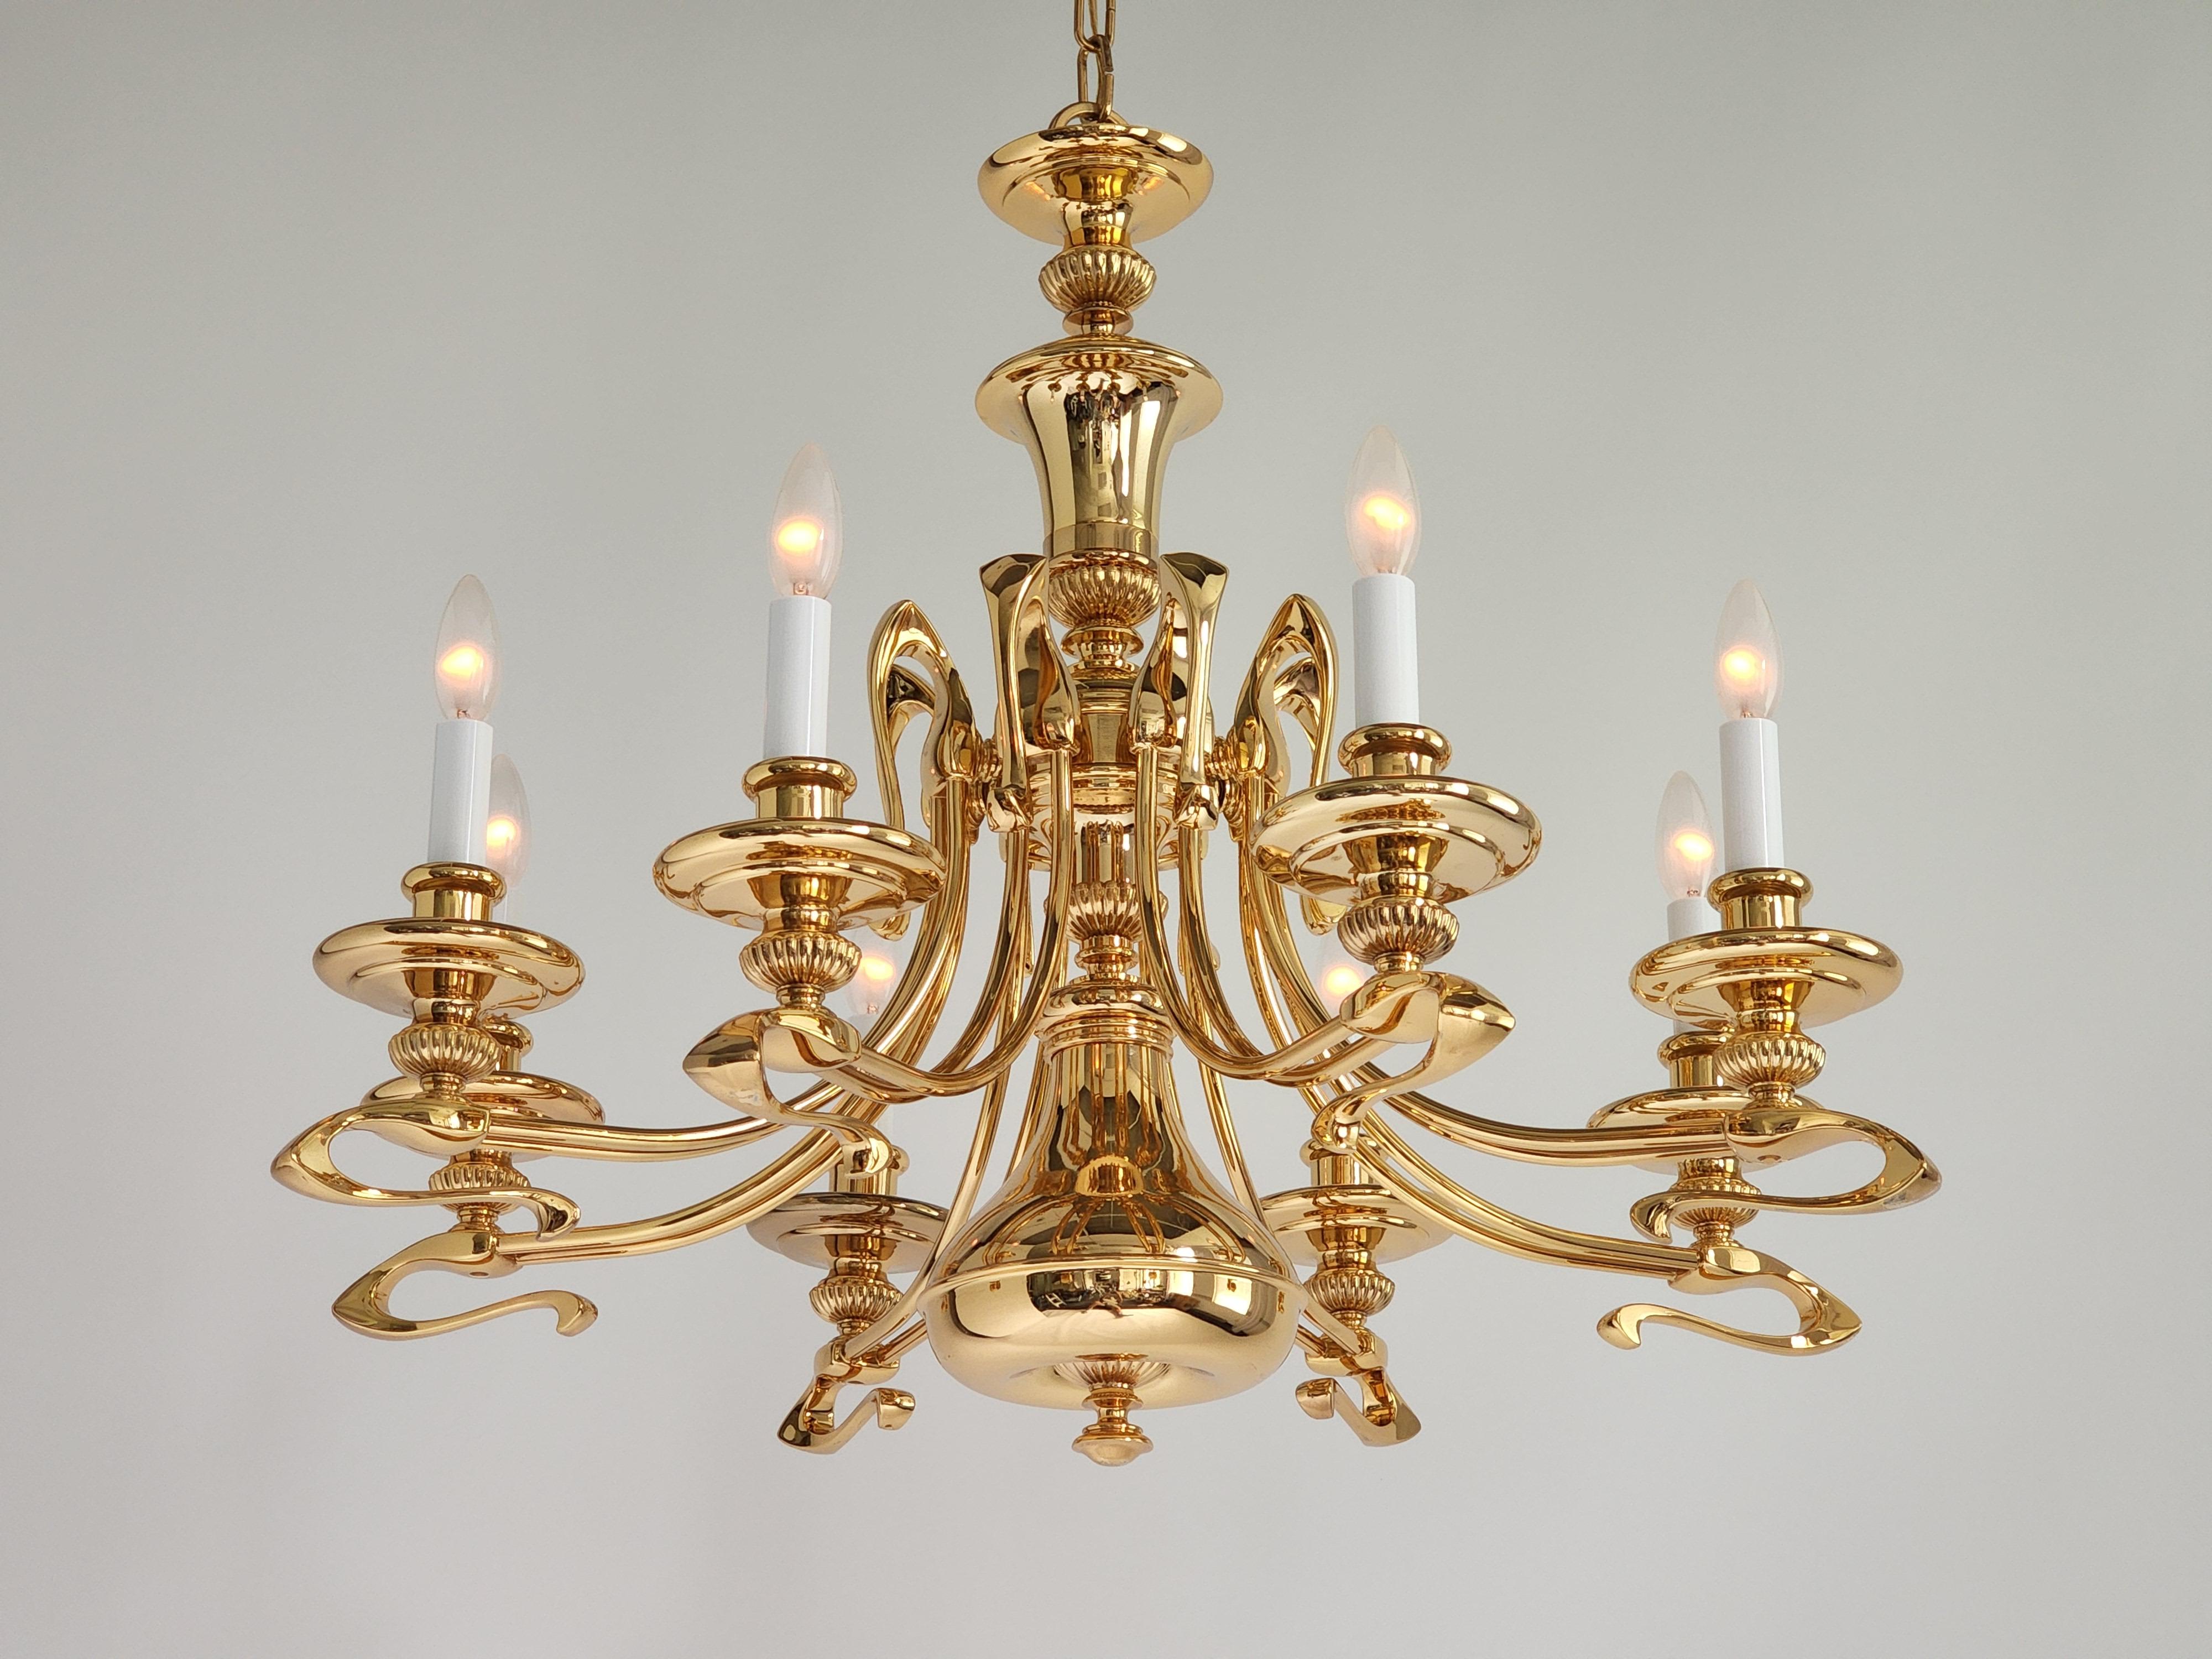 Massive Art Nouveau style chandelier with a classic twist. 

Solid, thick, well made chandelier with a deep gold plated finish. 

8 candelabra size socket rated at 40 watt each. 

32 inches long gold plated chain with matching canopy.